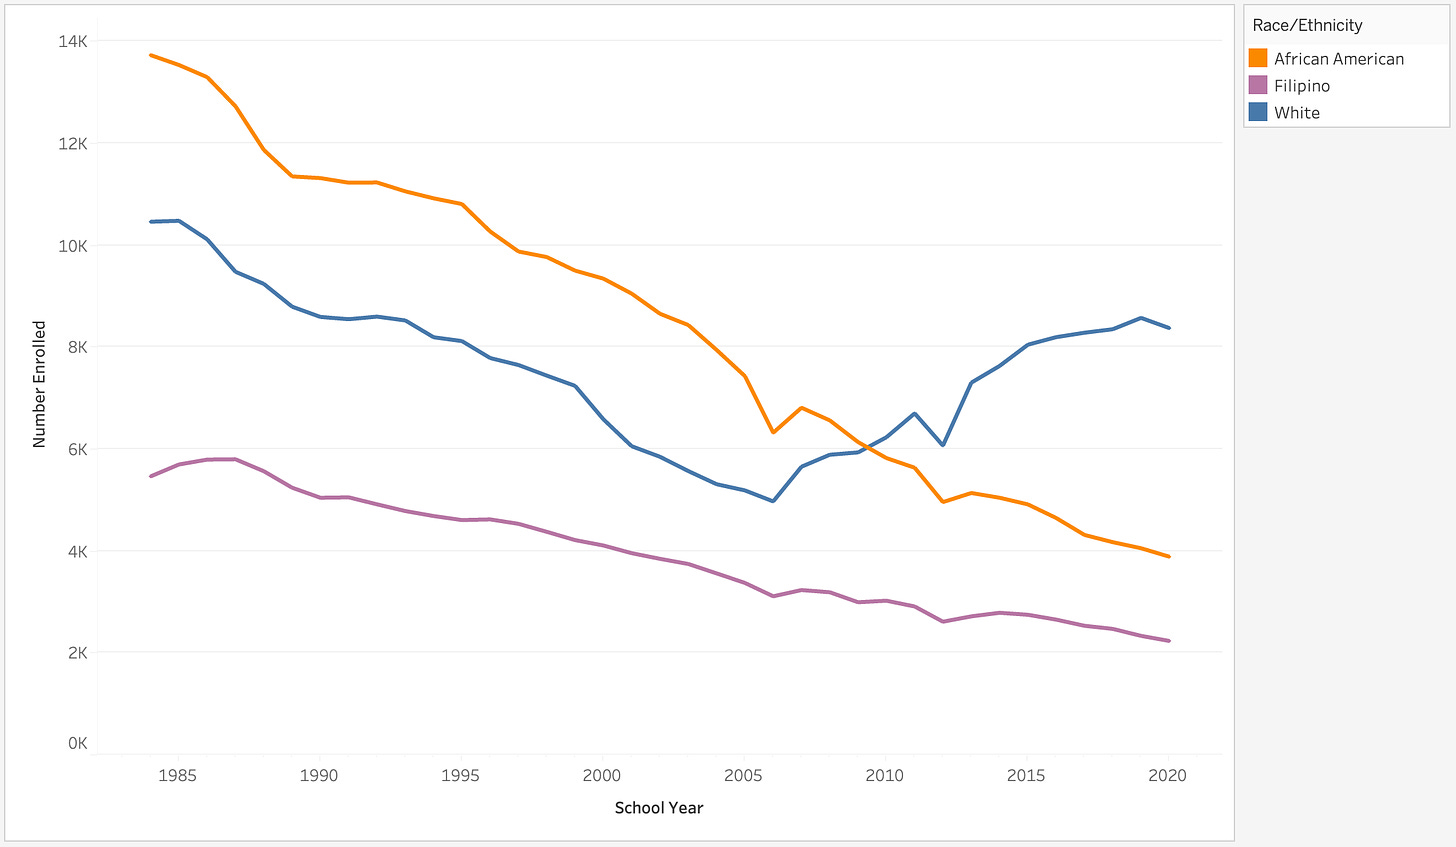 Chart showing African American and Filipino enrollment declining steadily while White enrollment rebounds